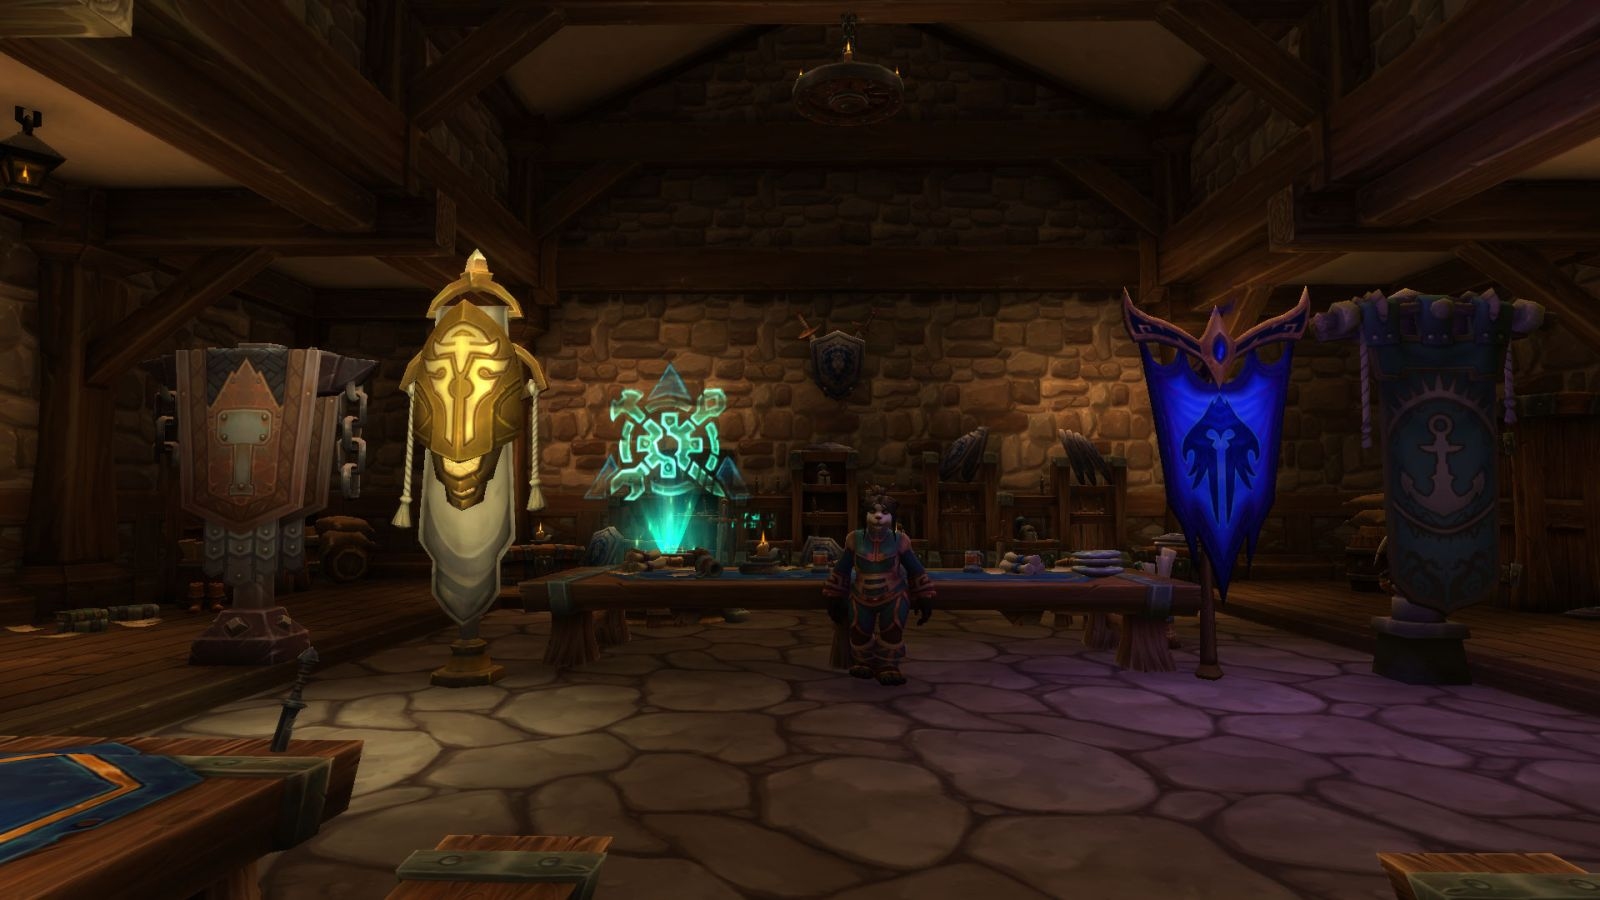 Tails of azeroth blue is better. Blue is better 2 - Tails of Azeroth. Blue is better 2. Blue is better 2 wow.